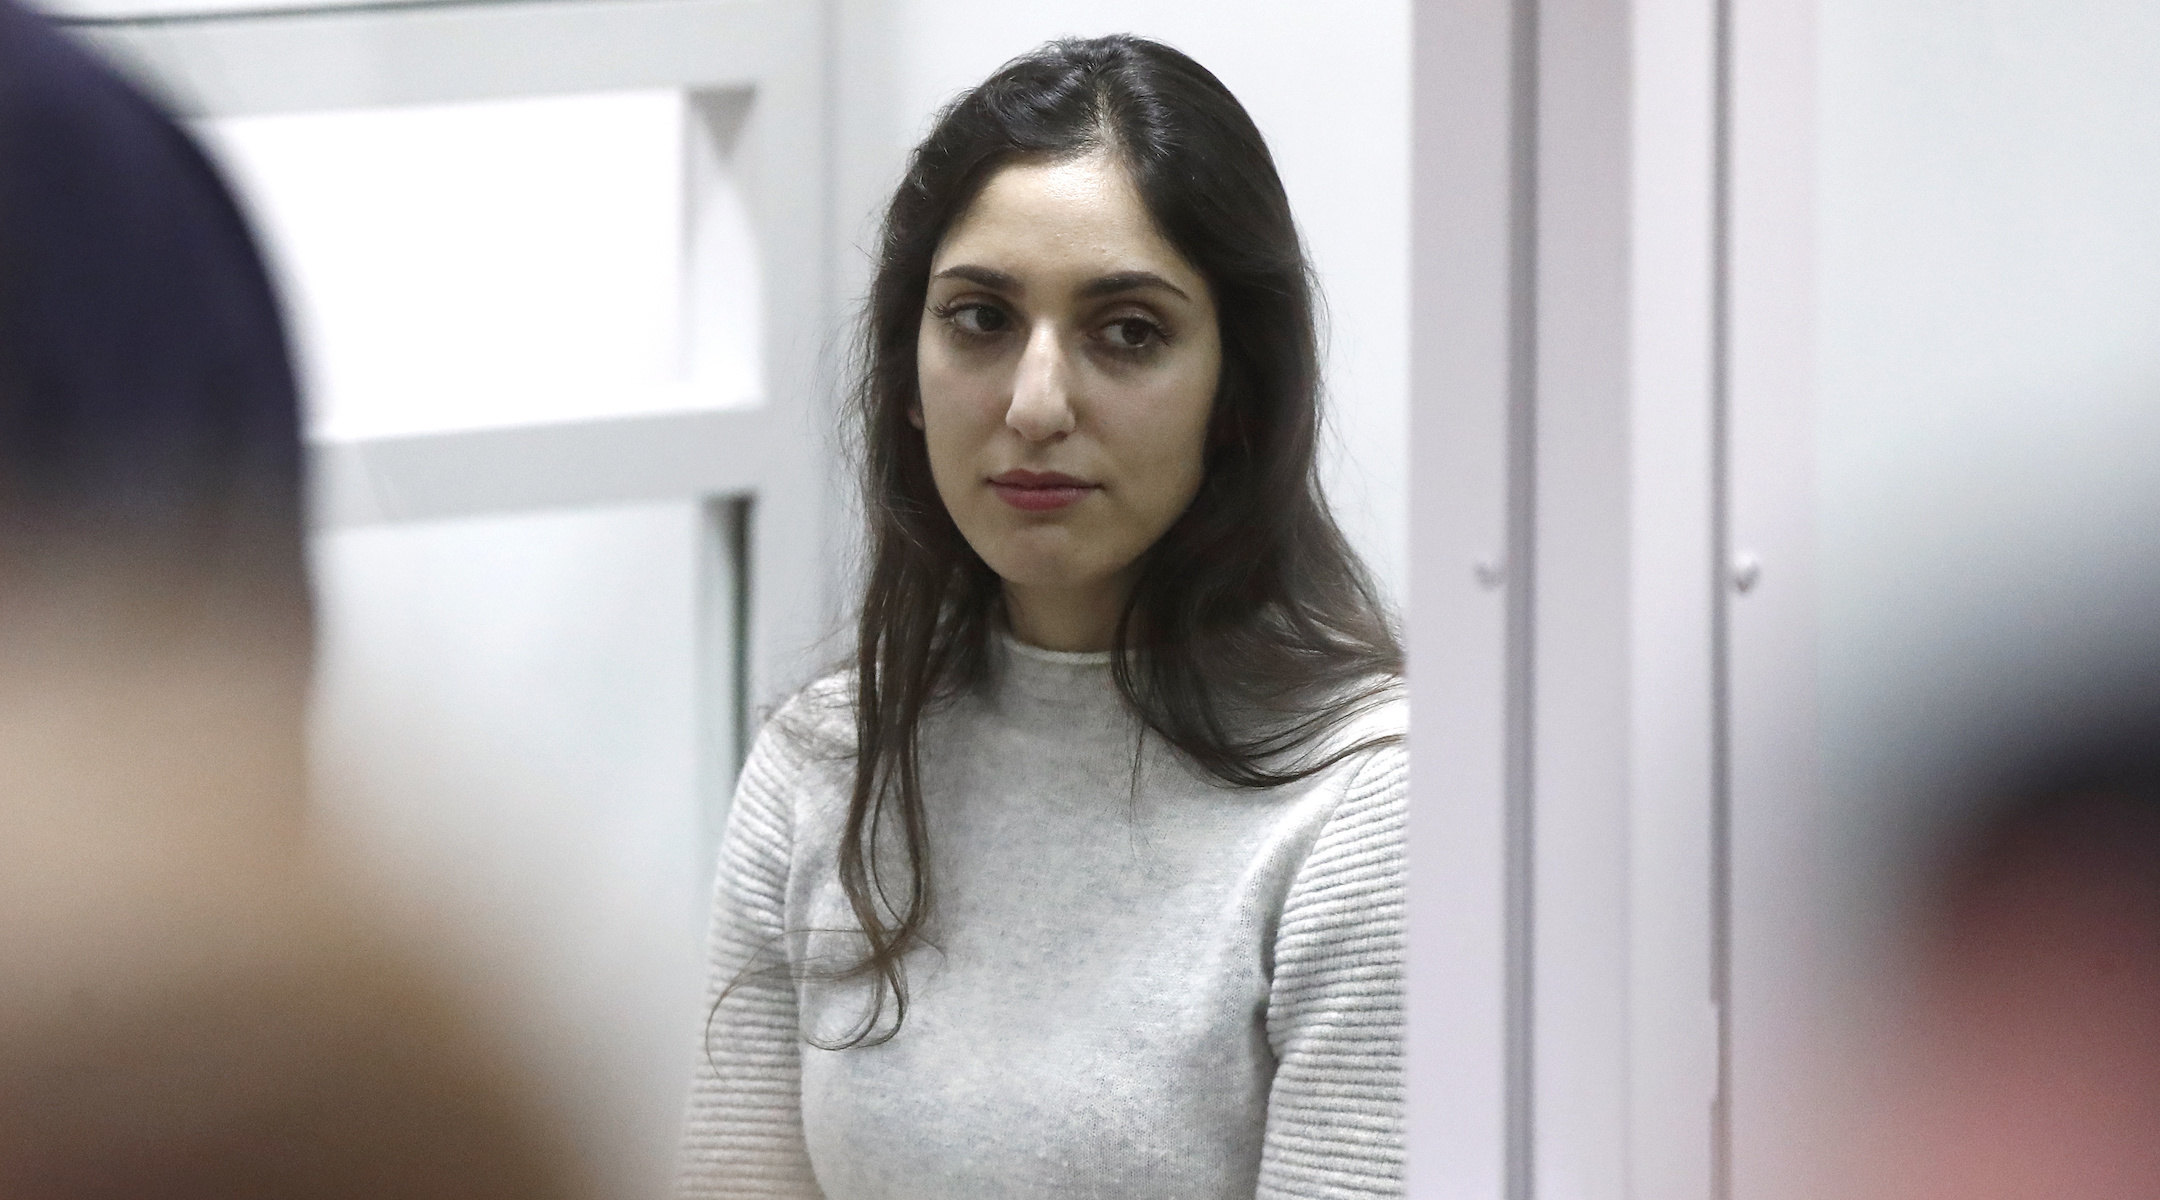 Naama Issachar attends an appeal hearing at the Moscow Region Court in Krasnogorsk, Russia on Dec. 19, 2019. (Artyom Geodakyan/Getty Images)